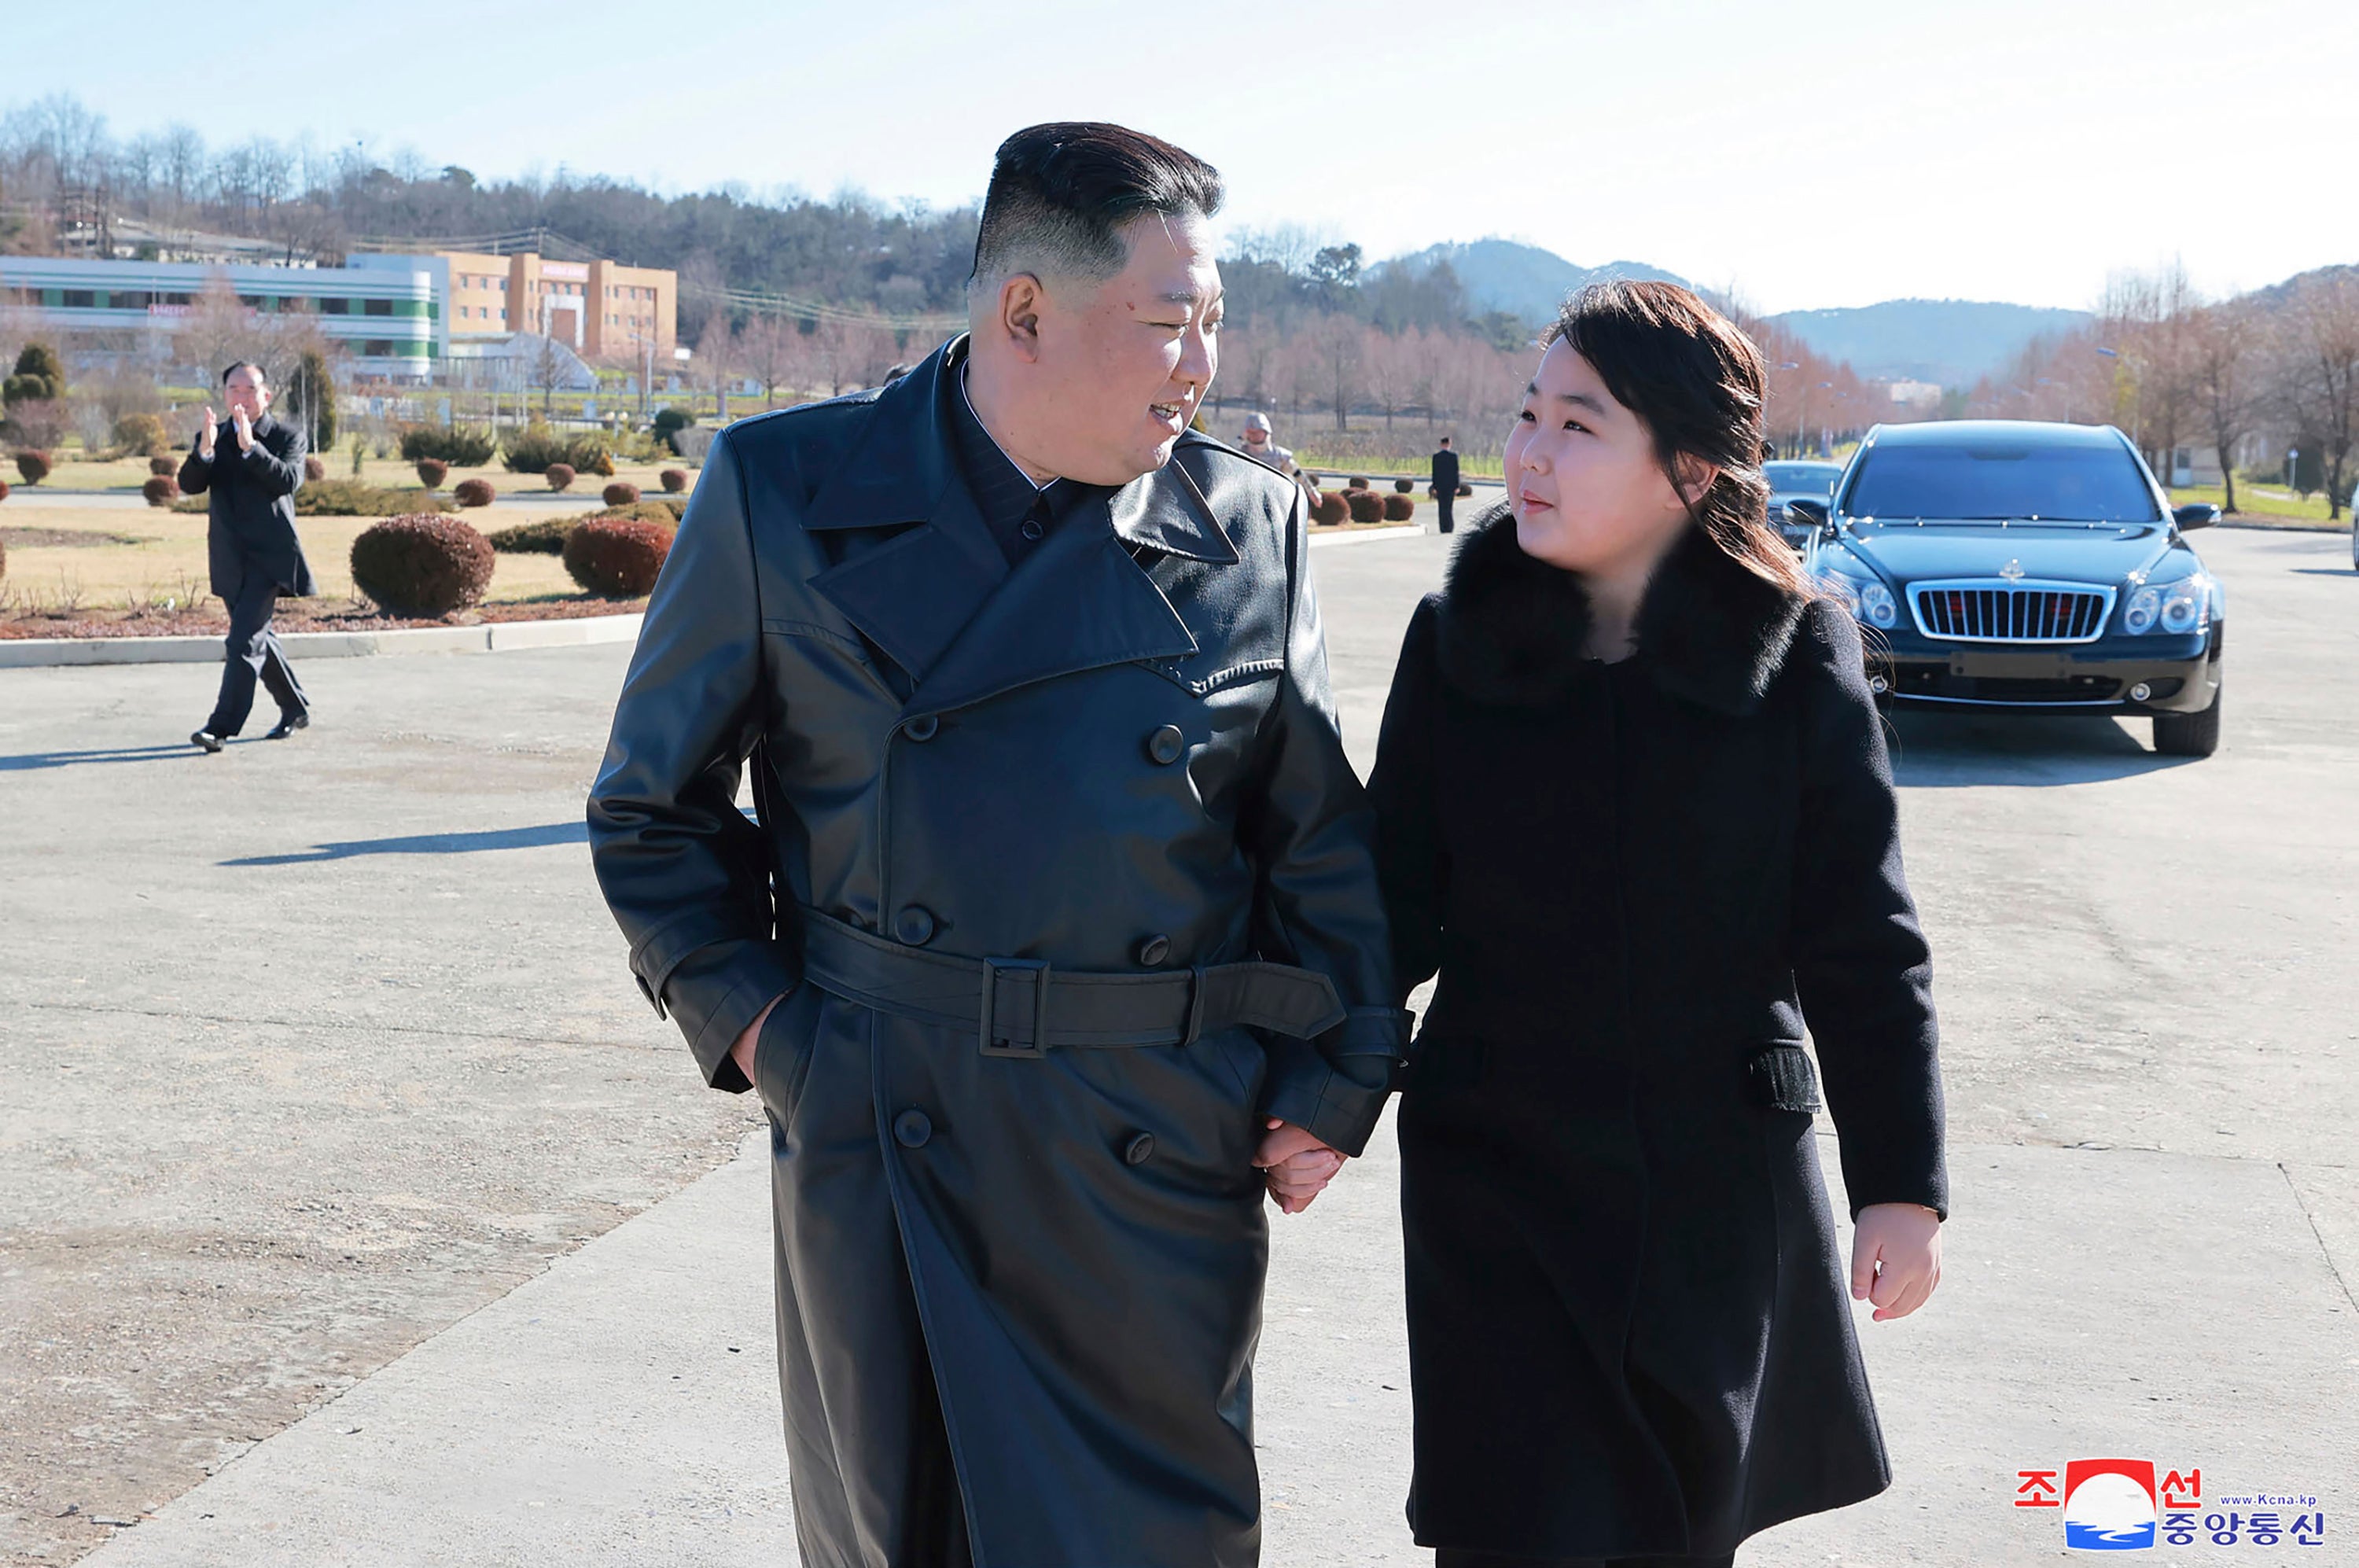 North Korean leader Kim Jong-un and his daughter seen following the launch of an intercontinental ballistic missile, at an unidentified location